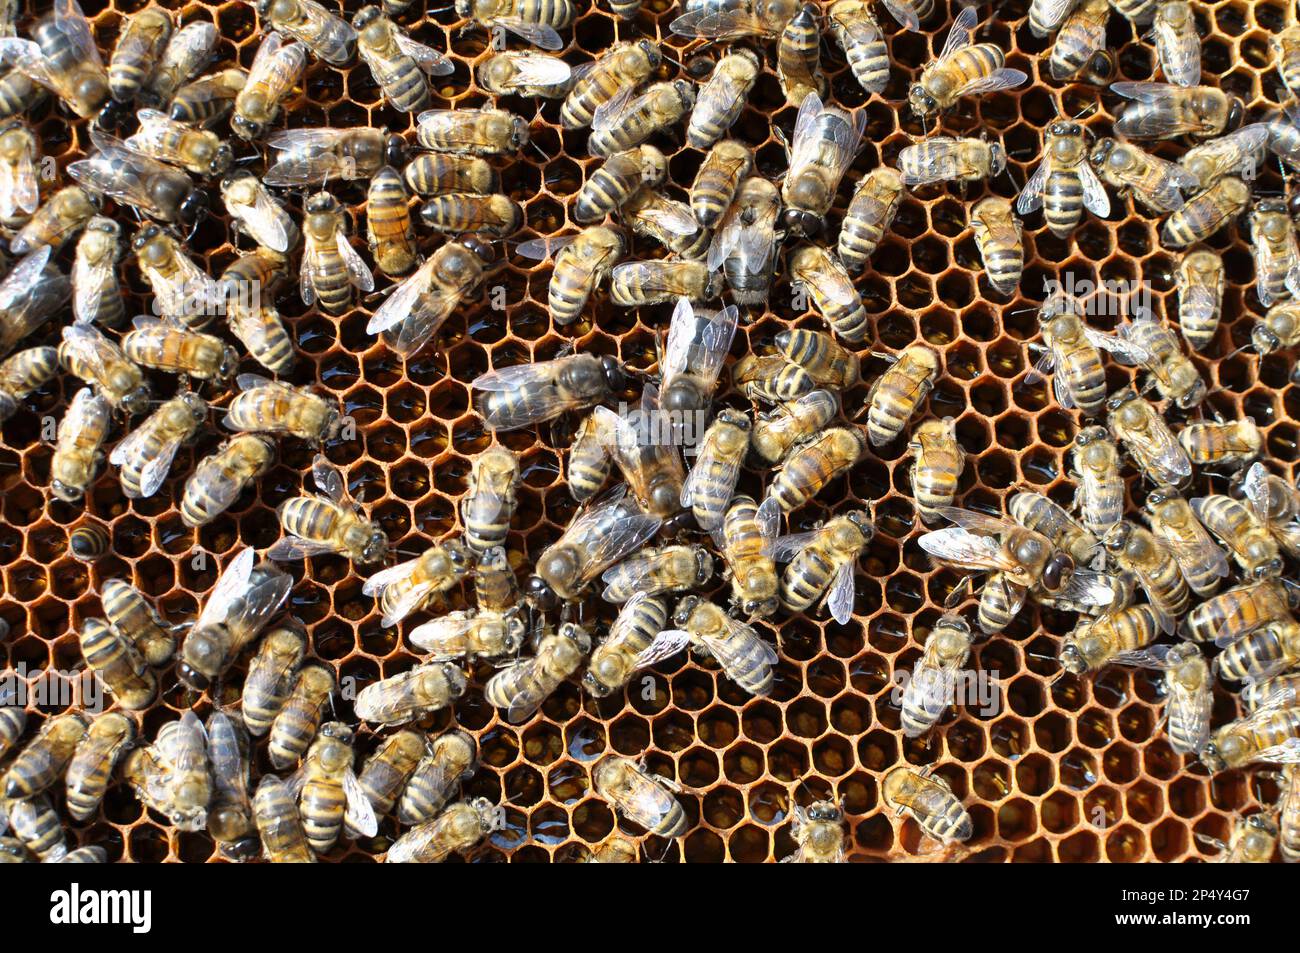 Drones and worker bees on part of the comb Stock Photo